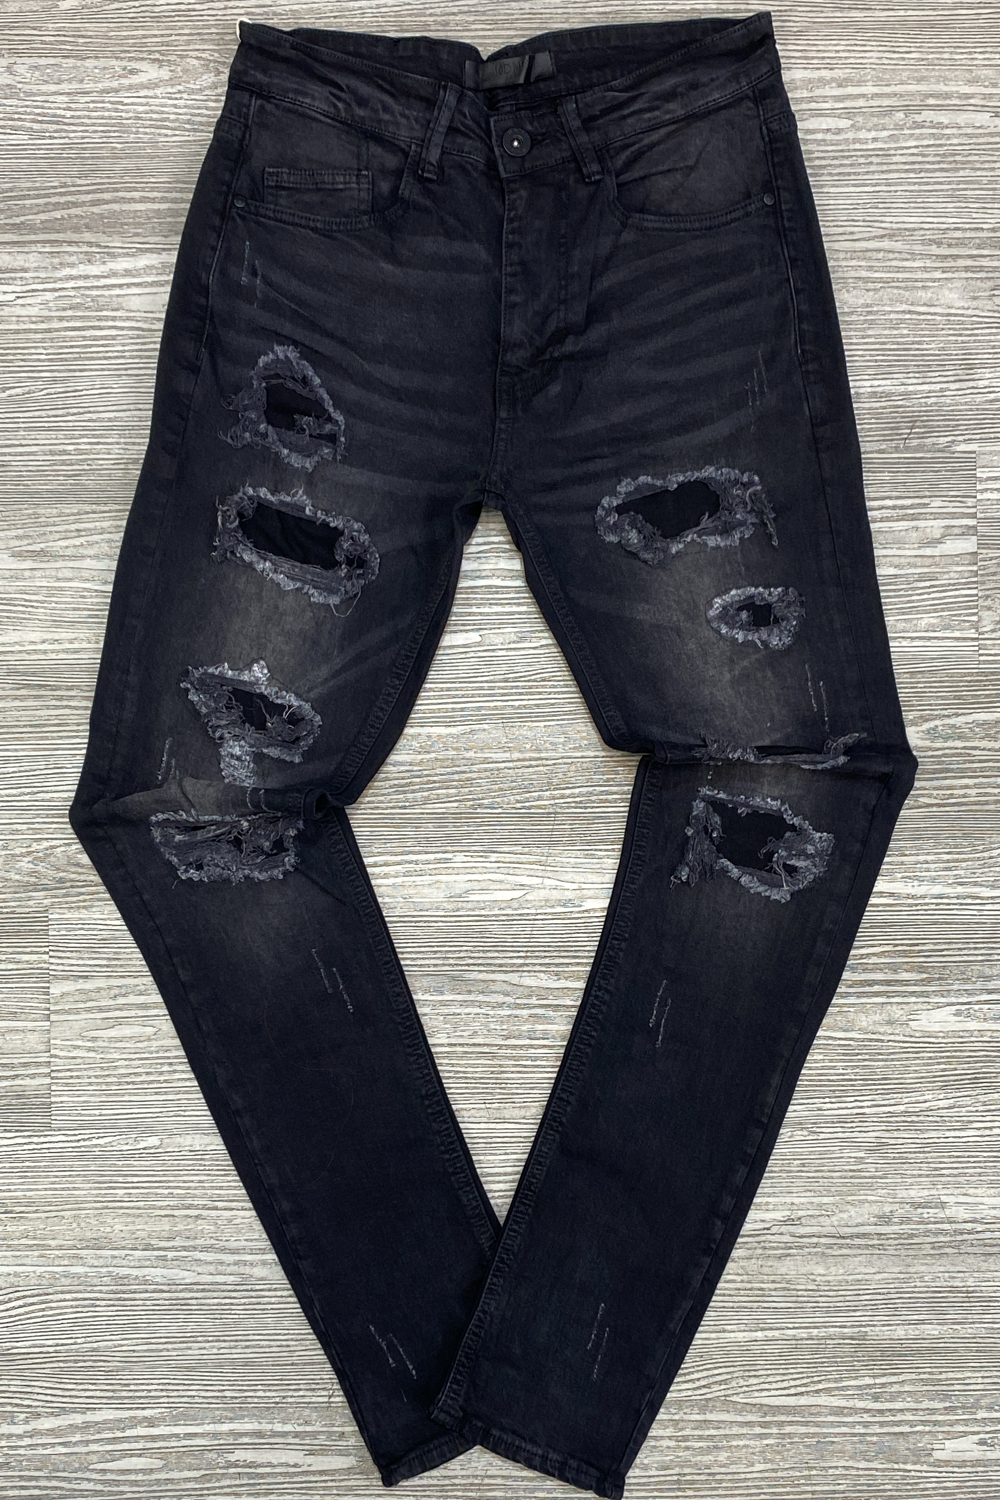 KDNK- patched jeans (black)